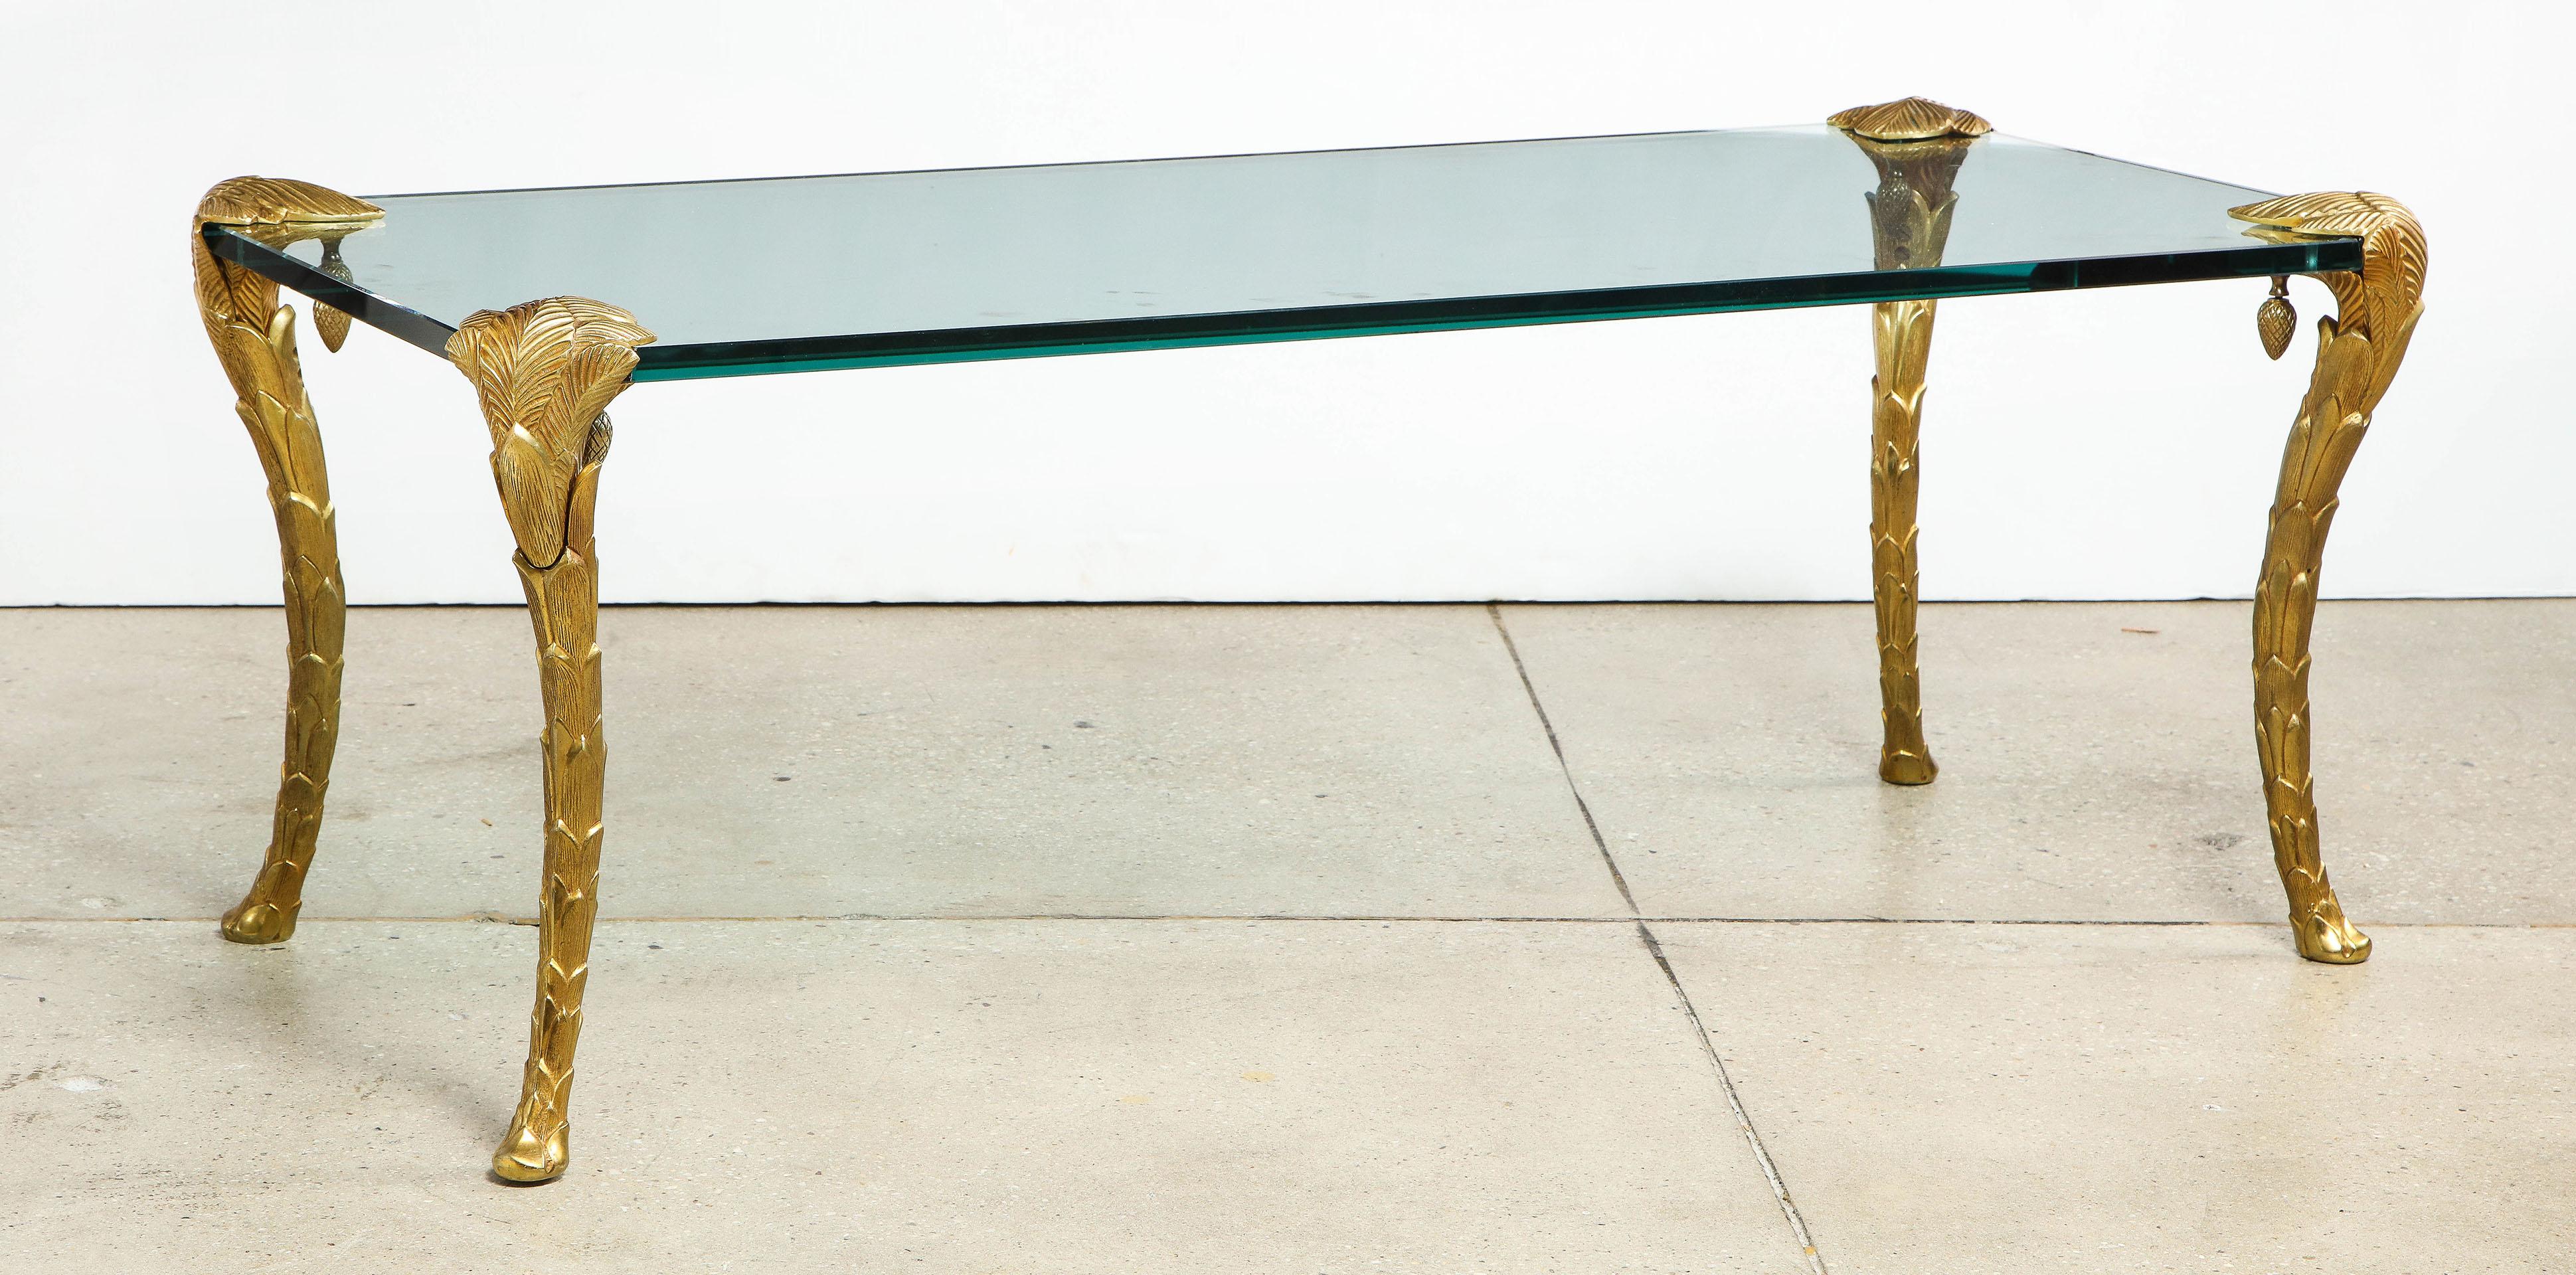 The glass top supported by four doré bronze legs in the form of palms.